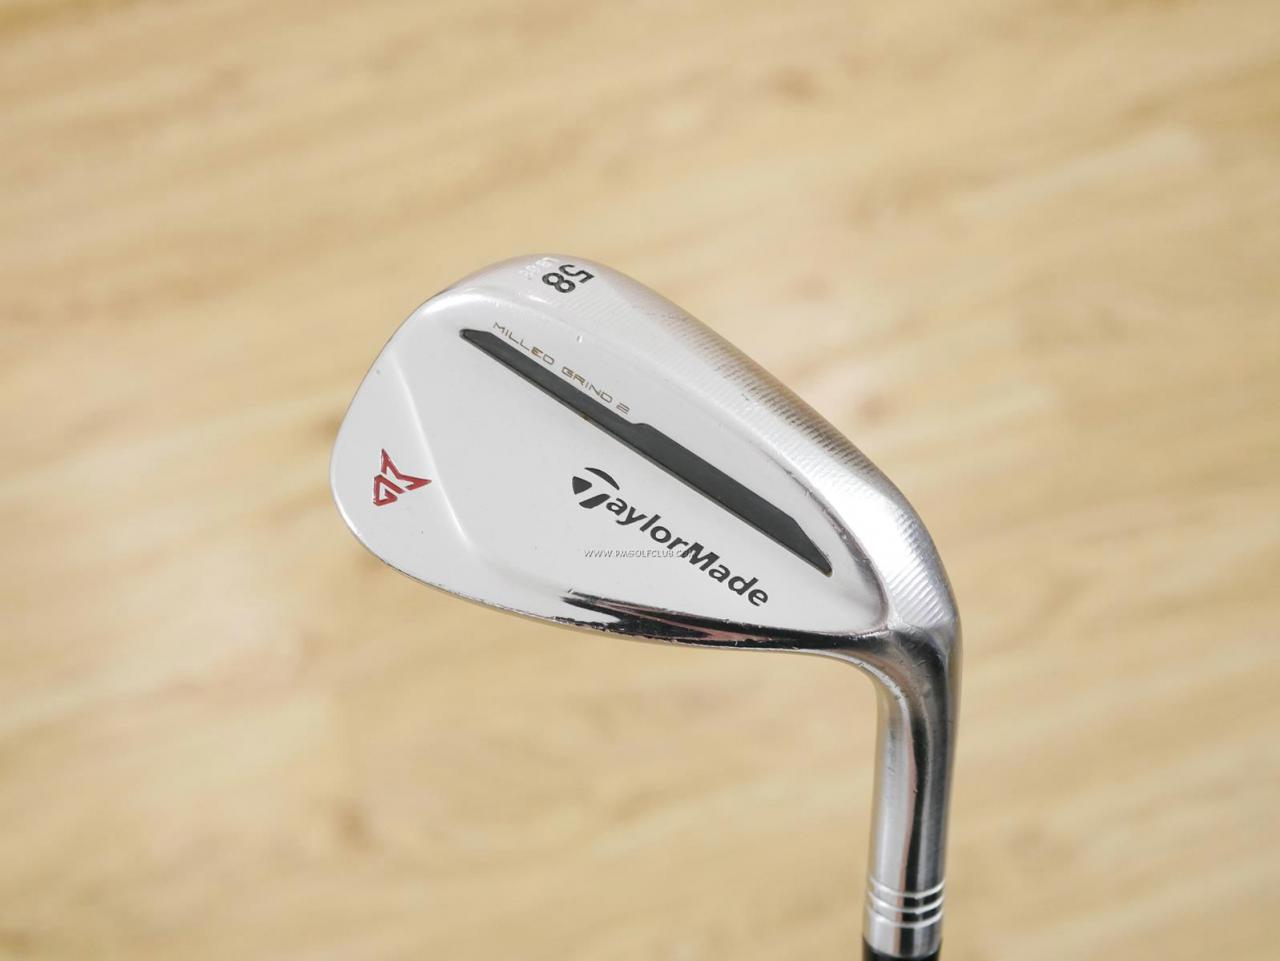 Wedge : Taylormade : Wedge Taylormade Milled Grind 2 Loft 58 ก้านเหล็ก Dynamic Gold S200